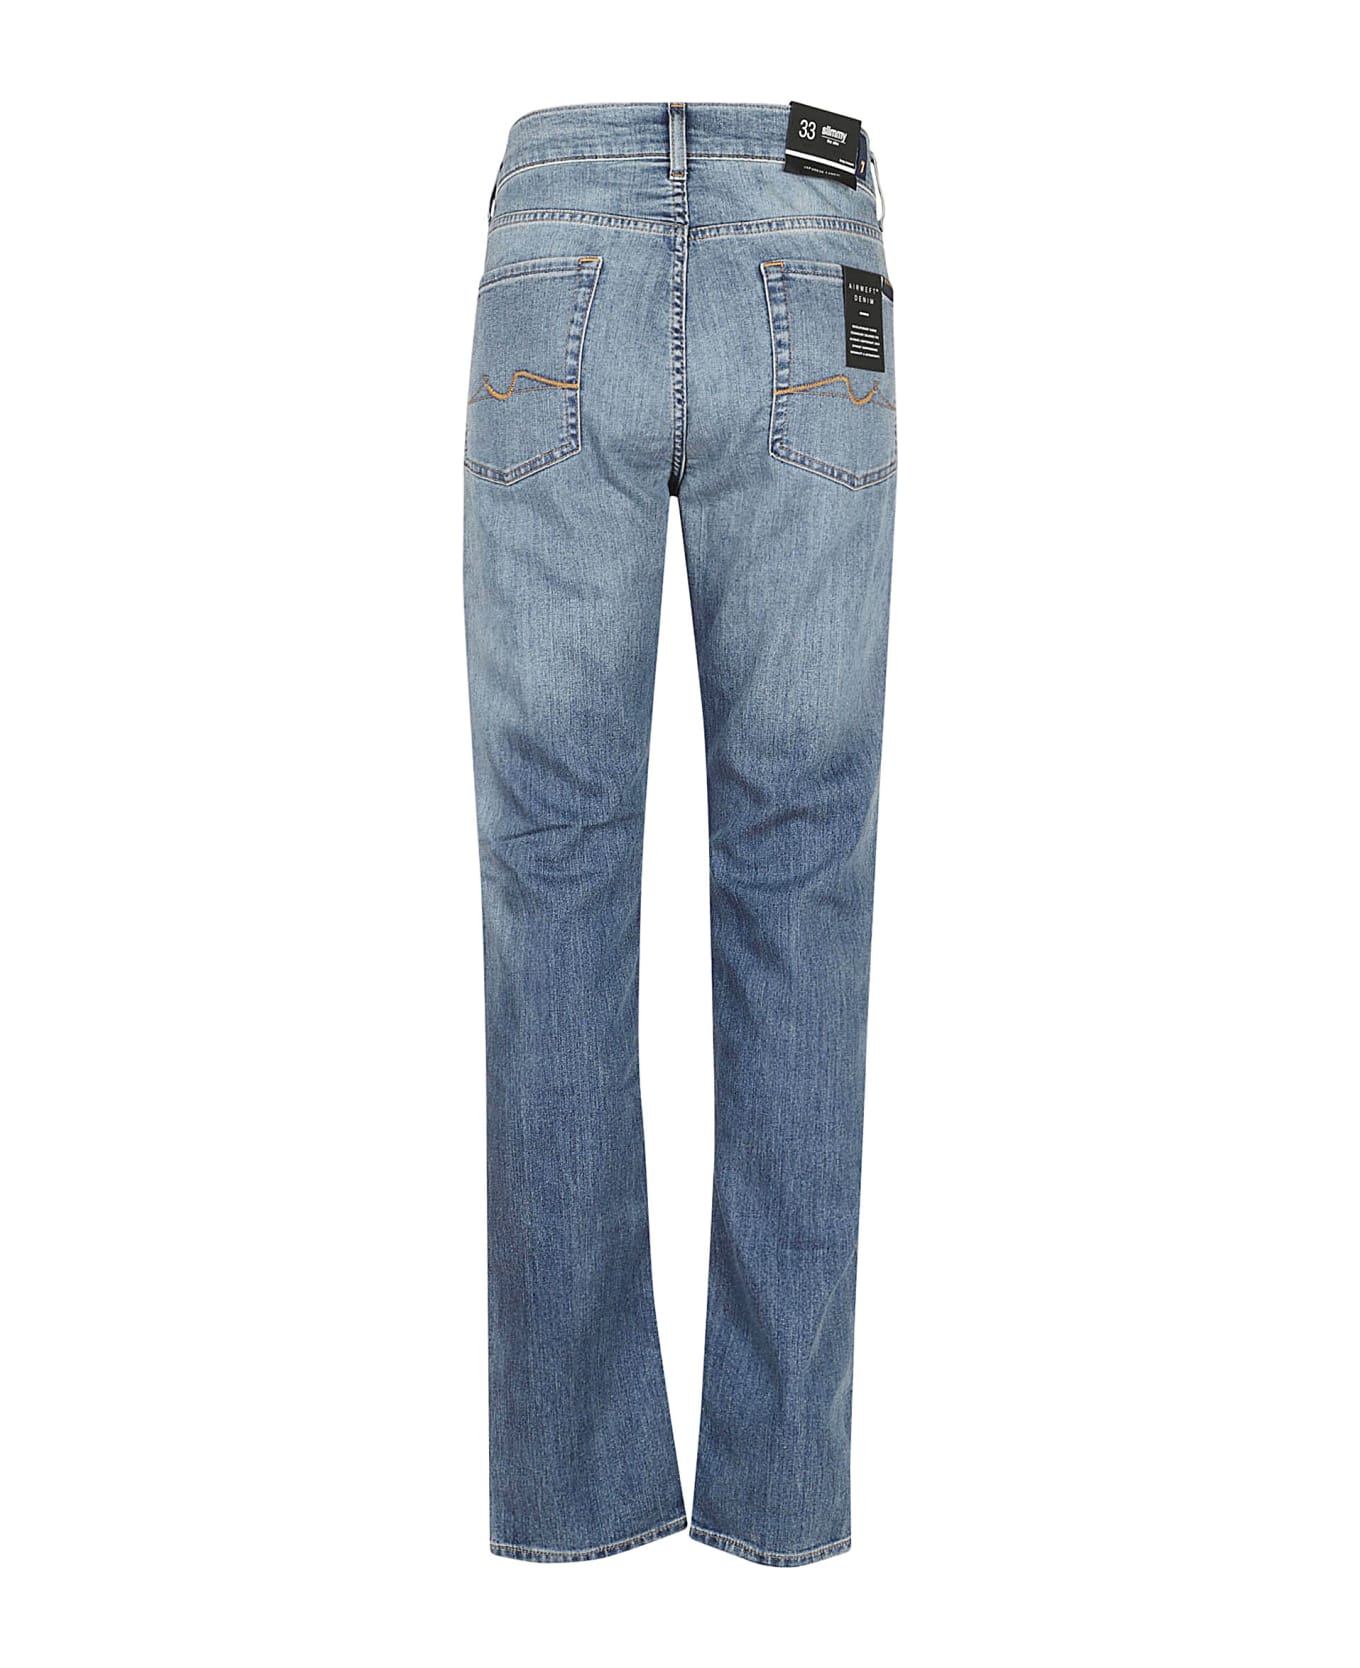 7 For All Mankind Slimmy Xl Momentum - Light Blue